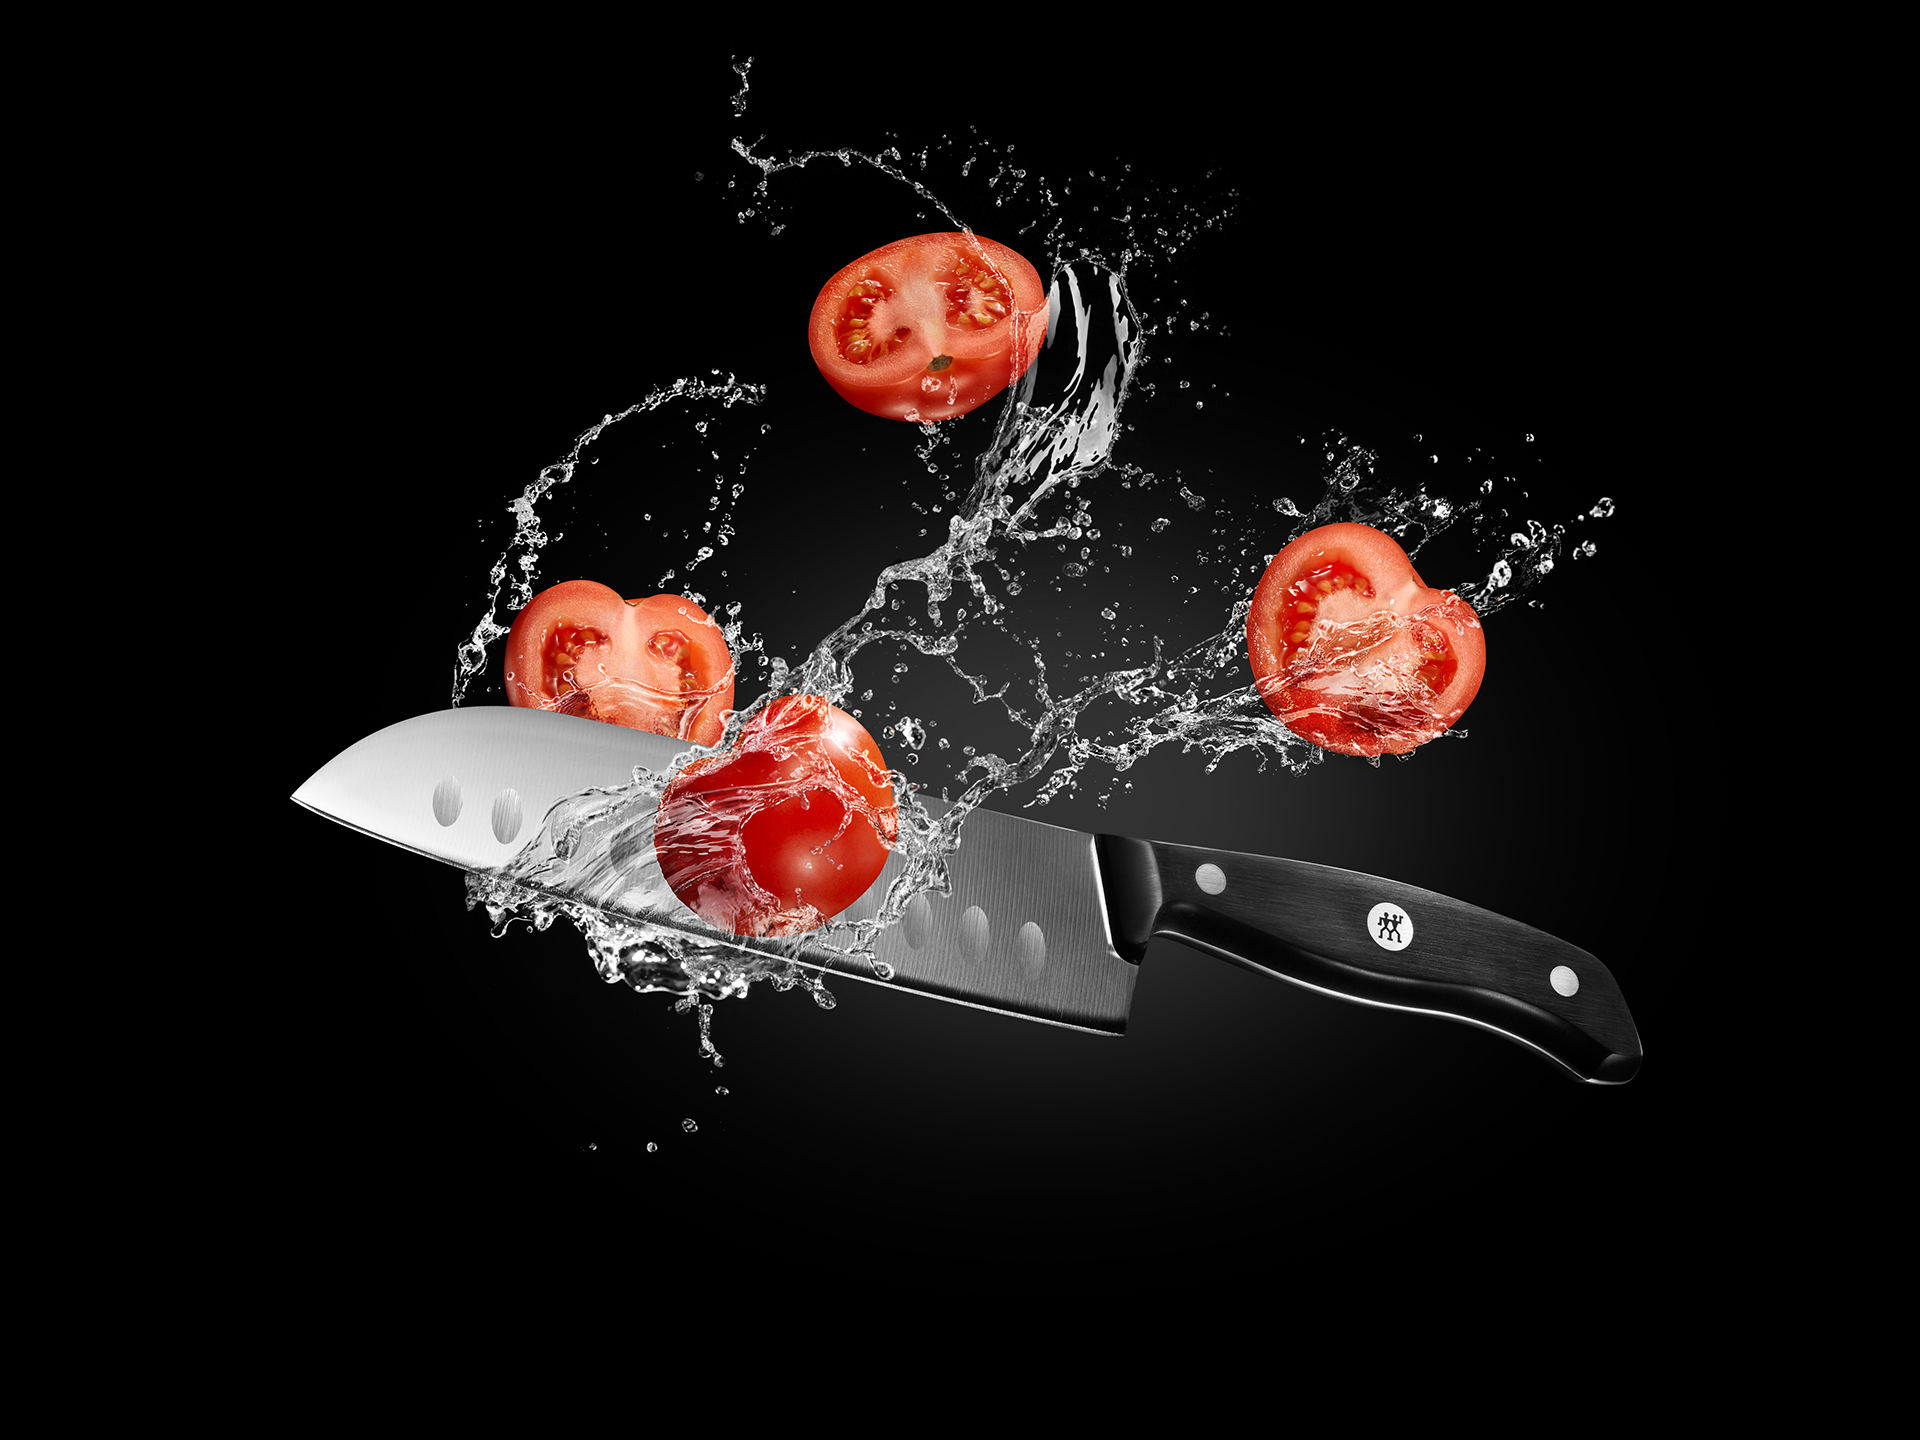 General 1920x1440 food knife tomatoes advertisements